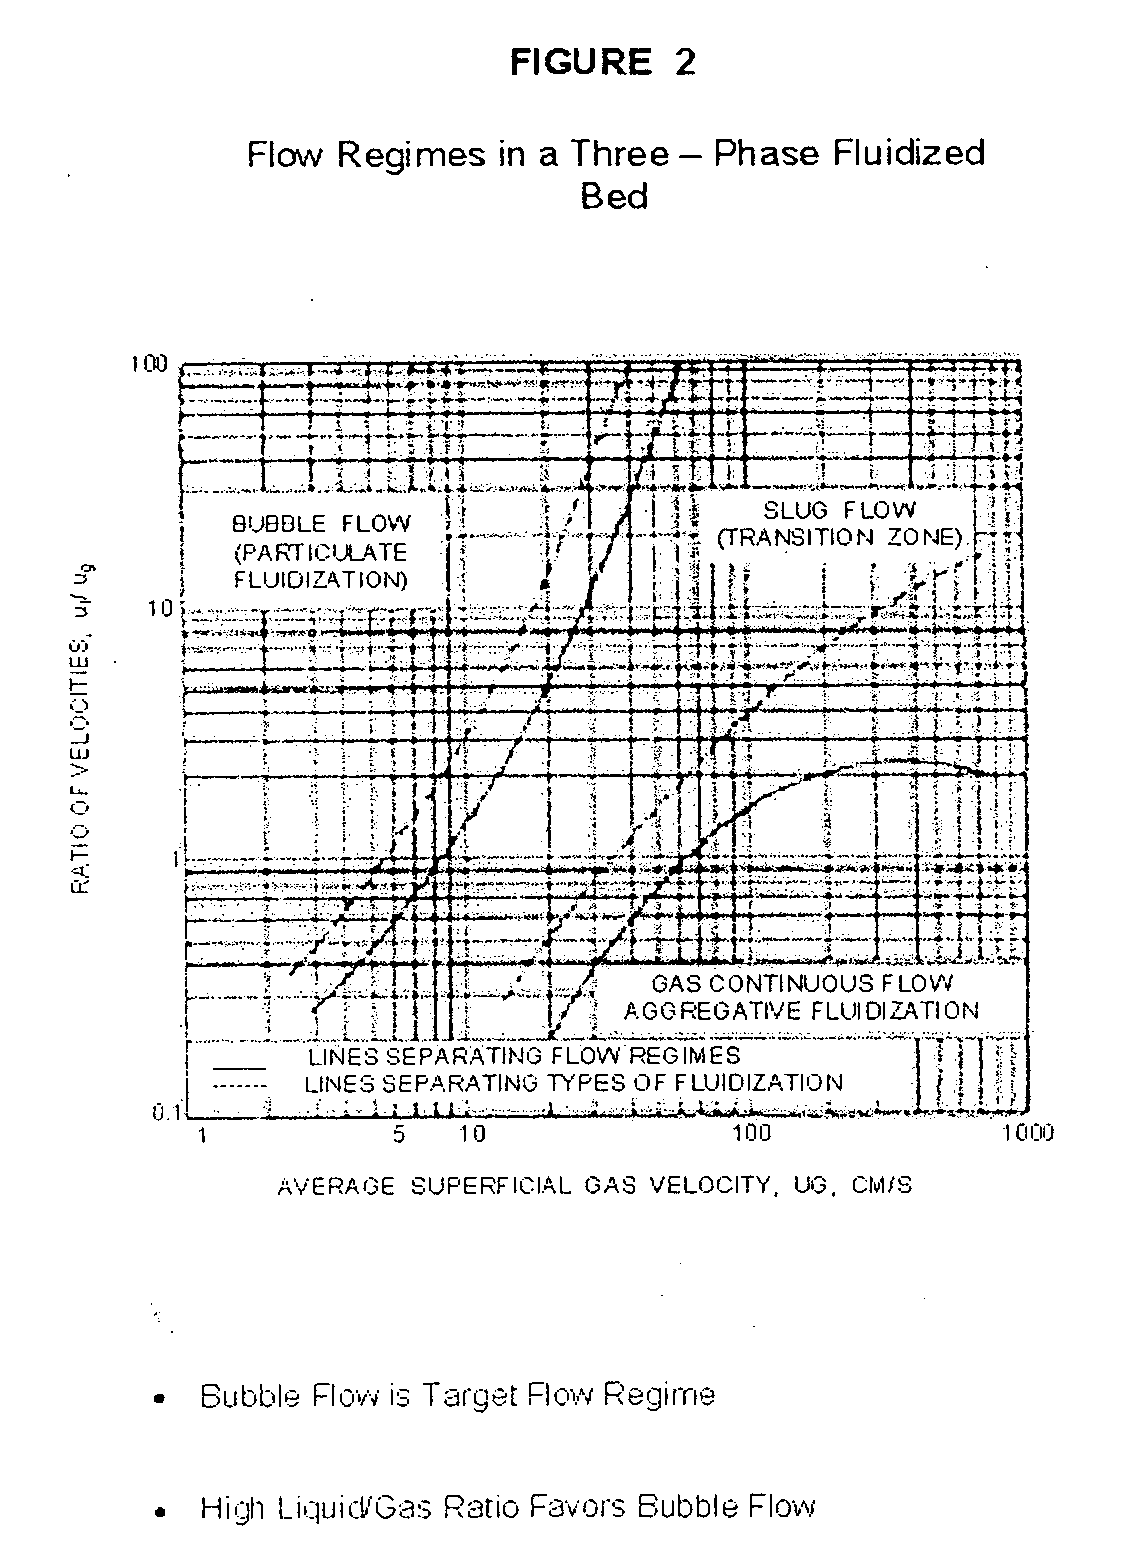 Reactor for use in upgrading heavy oil admixed with a highly active catalyst composition in a slurry